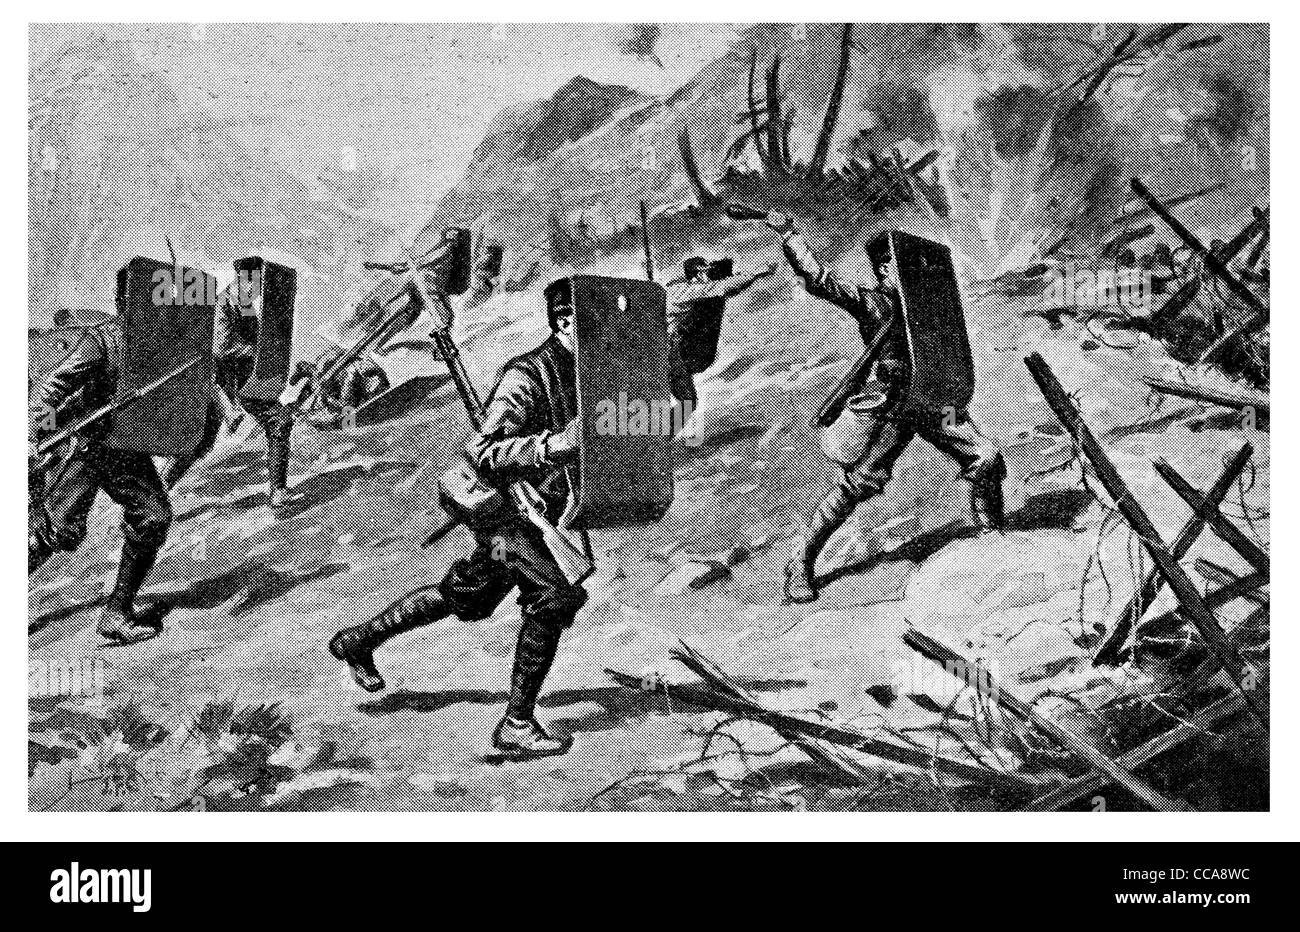 1917 Italian soldiers attacking enemy line bullet proof shields armoured shield hand grenade barbed wire rifle bayonet barricade Stock Photo